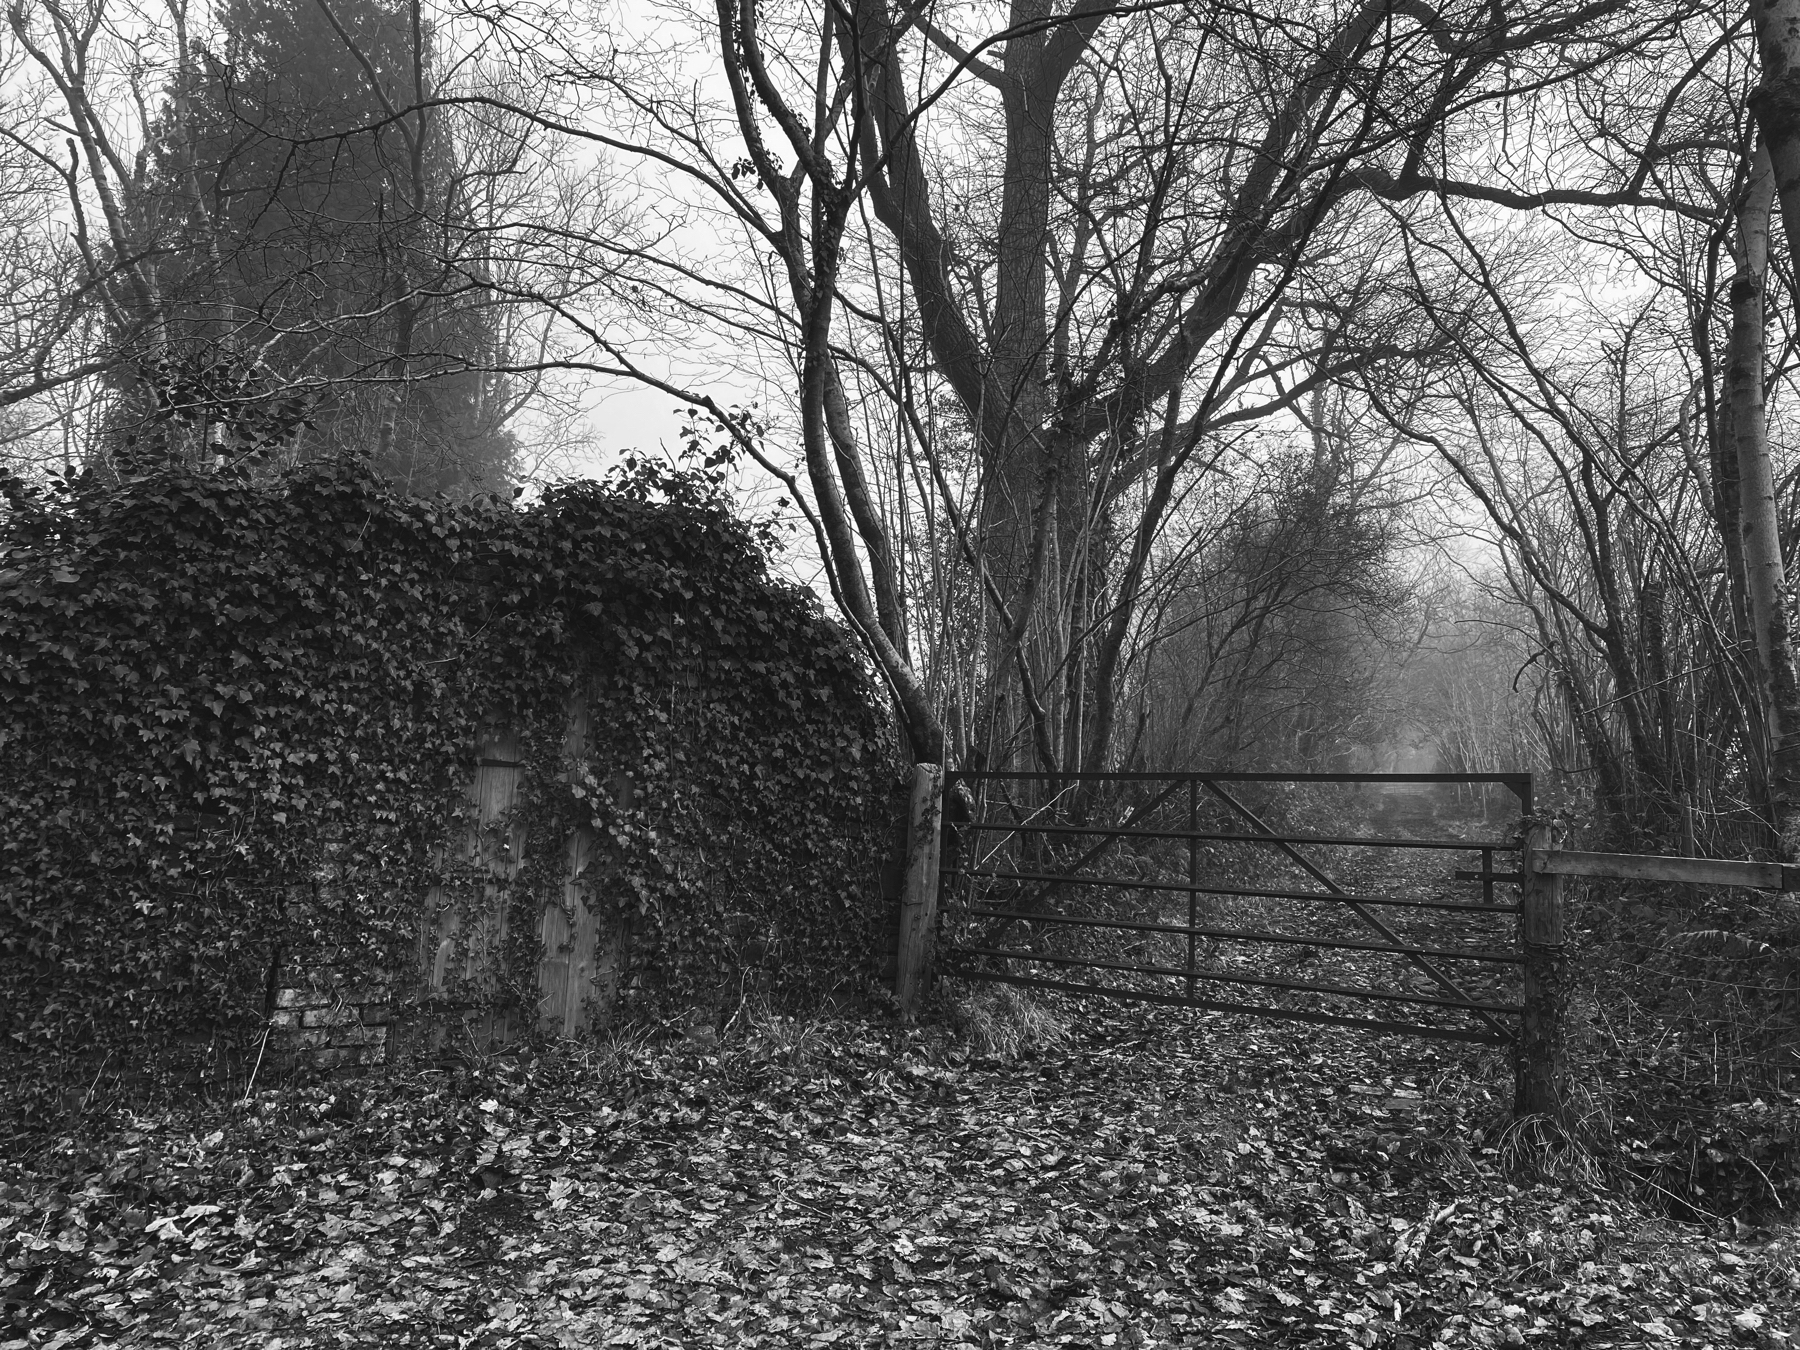 A black and white photograph of a misty wooded area with a closed metal gate in the foreground, surrounded by leaf-covered ground and trees with ivy-covered trunks.